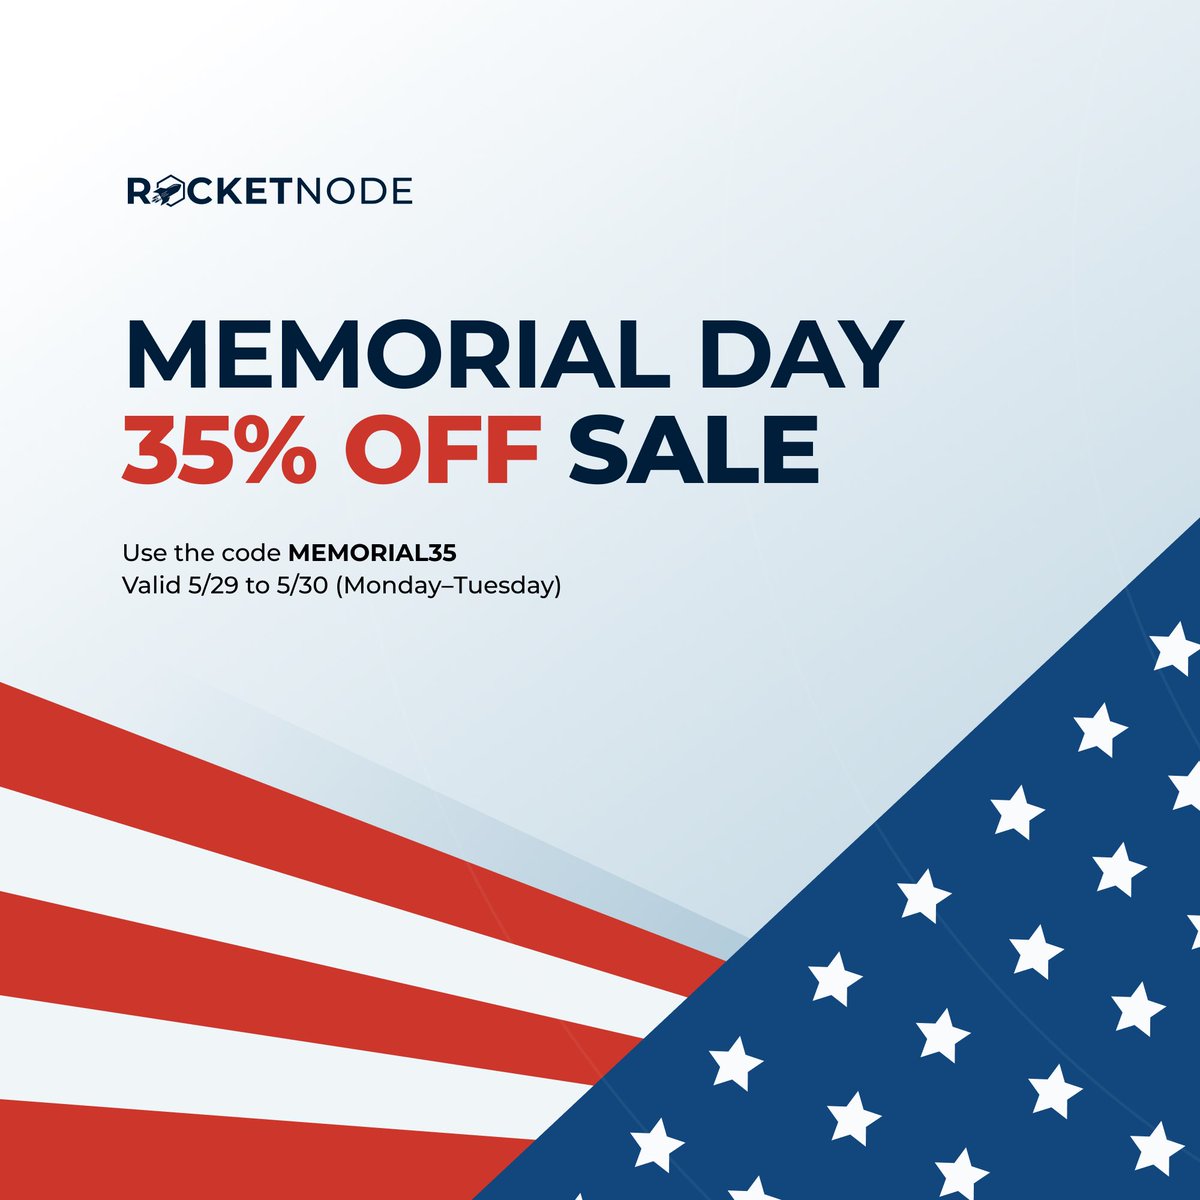 Thank you to the brave men and women who have made the ultimate sacrifice. Enjoy 35% OFF to all services with code MEMORIAL35!

#minecraft #rust #fivem #hosting #gamehosting #rocketnode